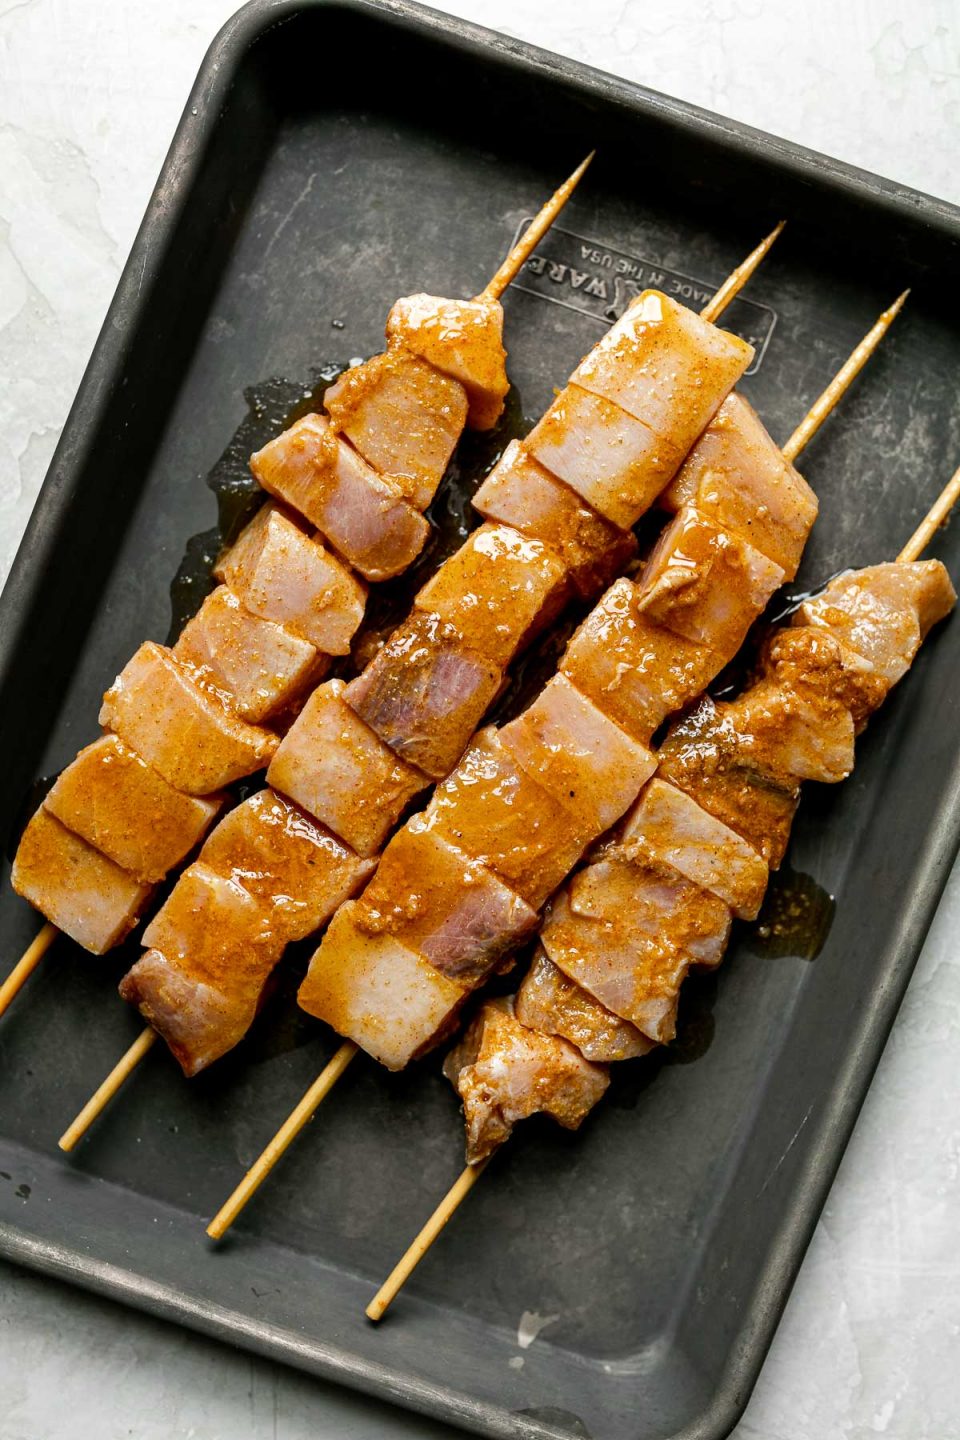 Marinaded cubed swordfish threaded on 4 bamboo skewers sitting in a dark gray baking sheet atop a creamy cement surface.